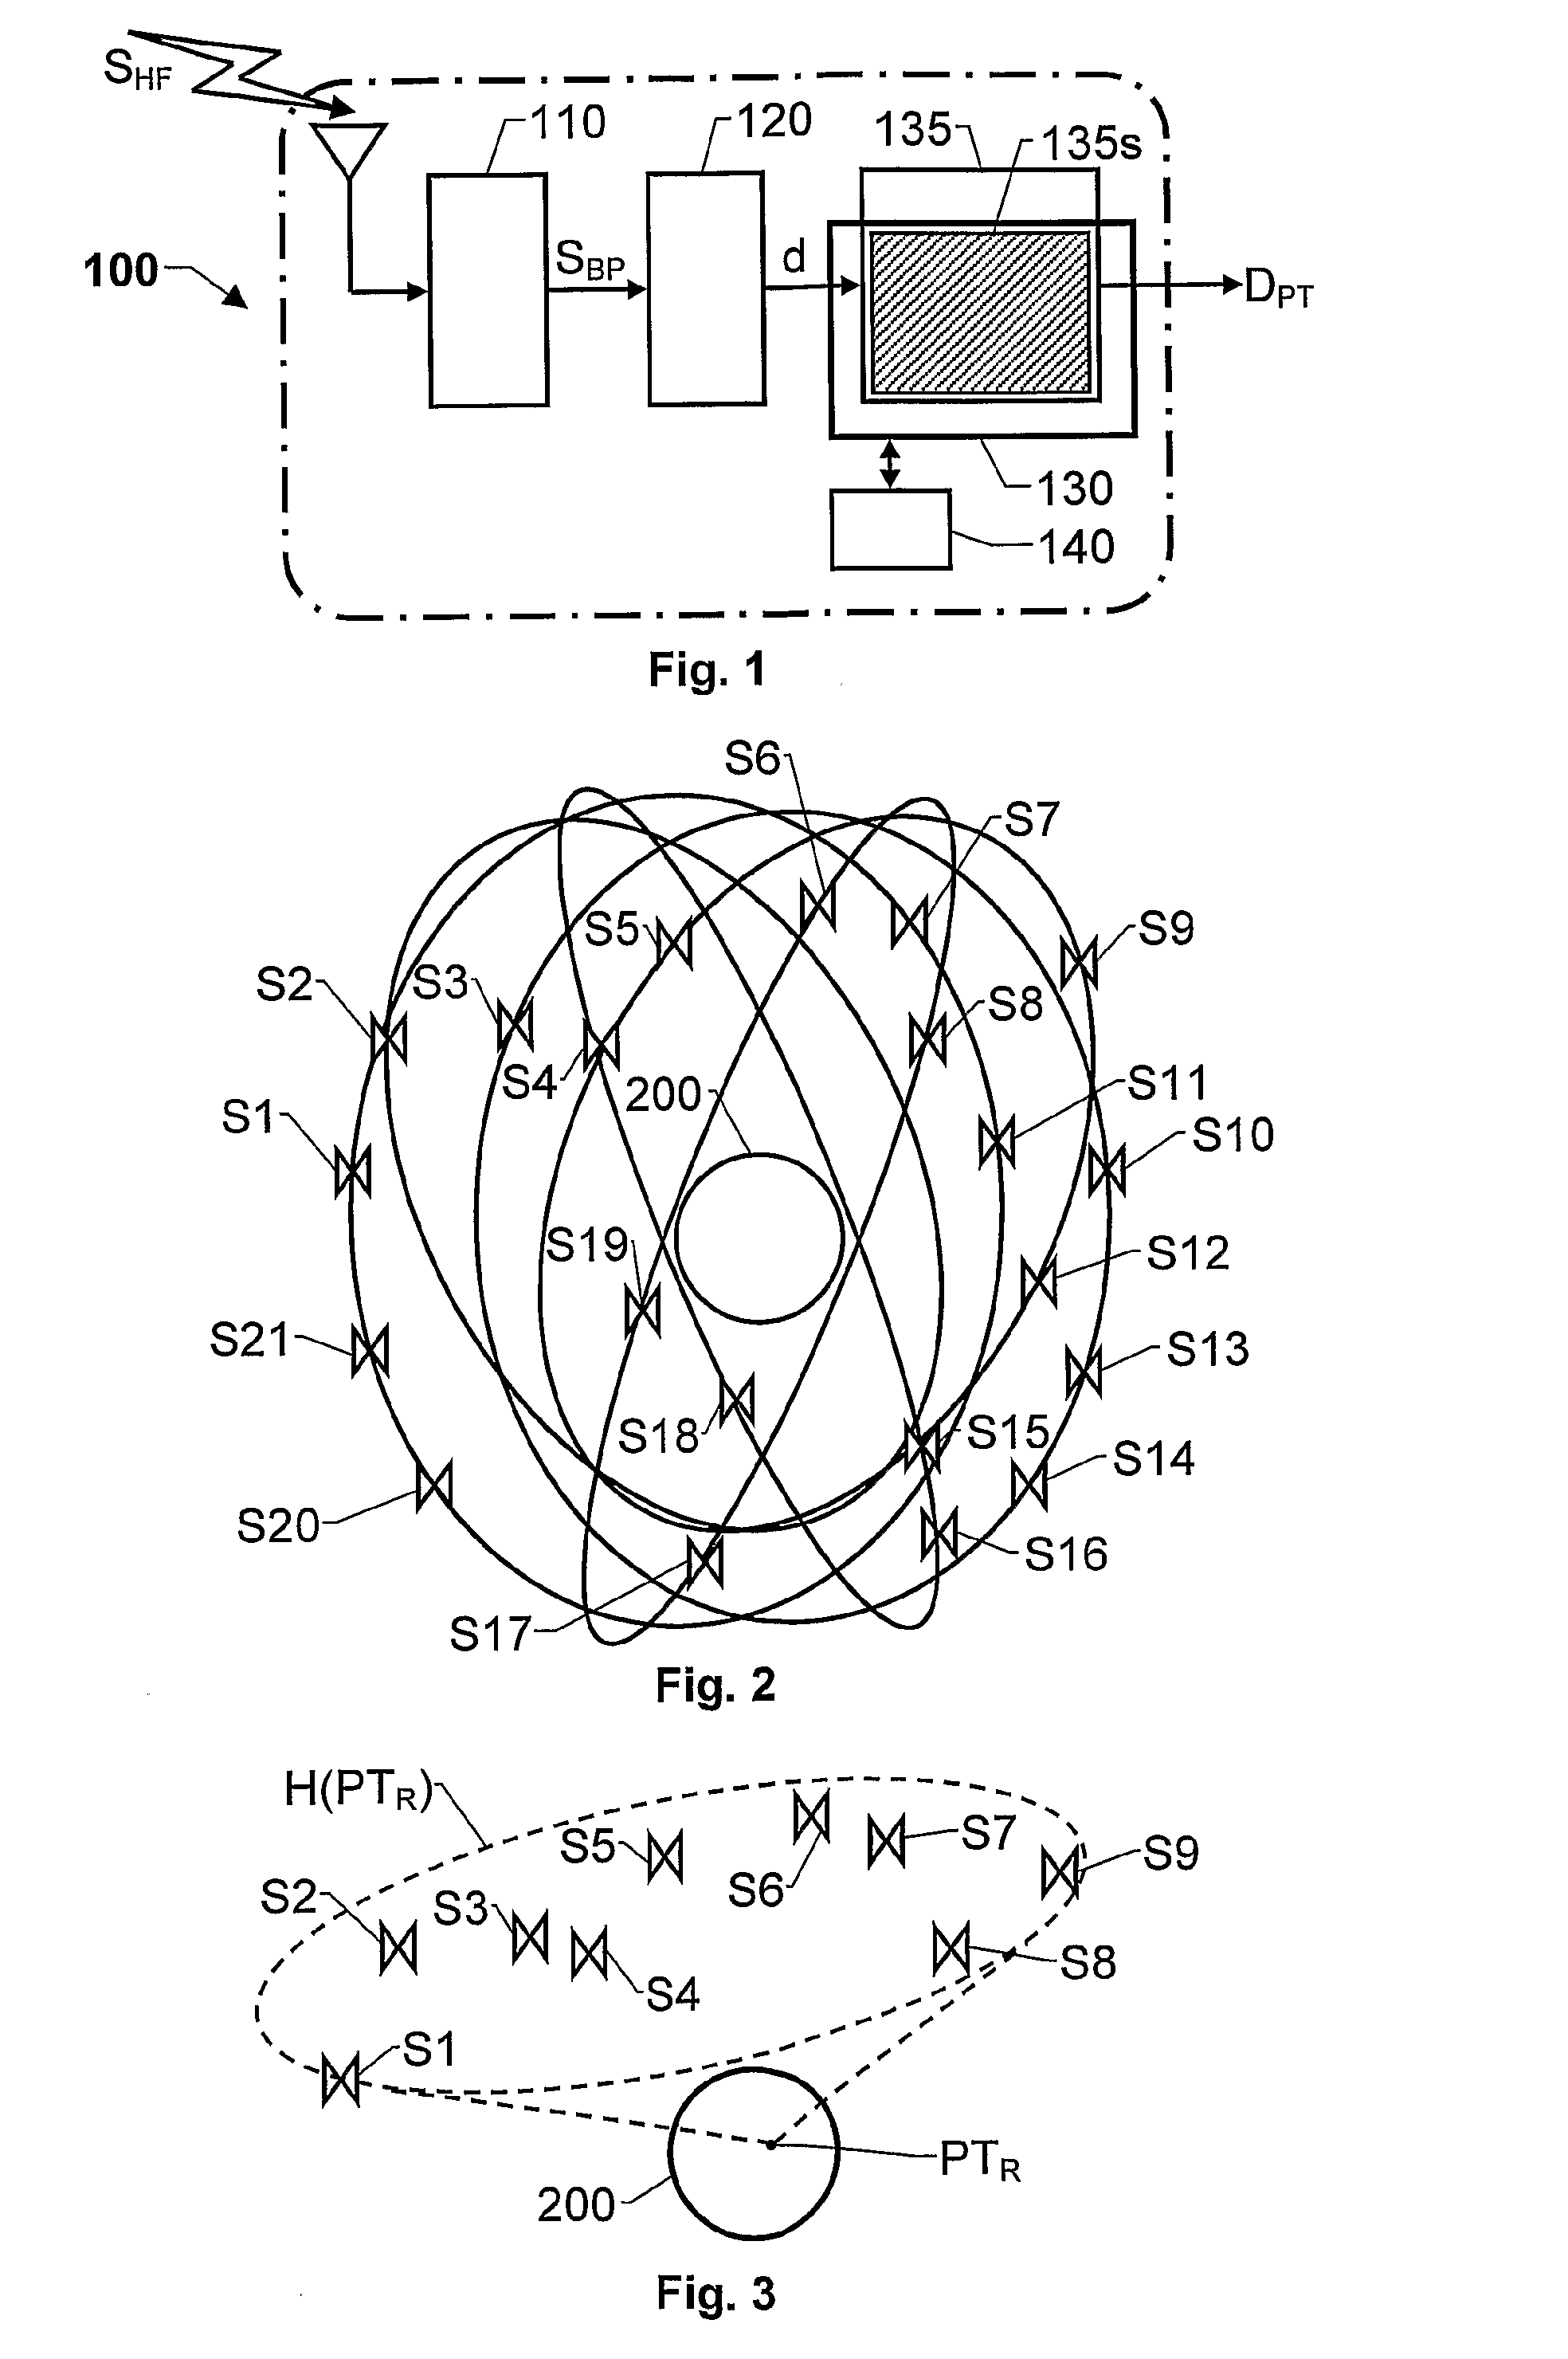 Method and Spread Spectrum Software Receiver for Satellite Navigation